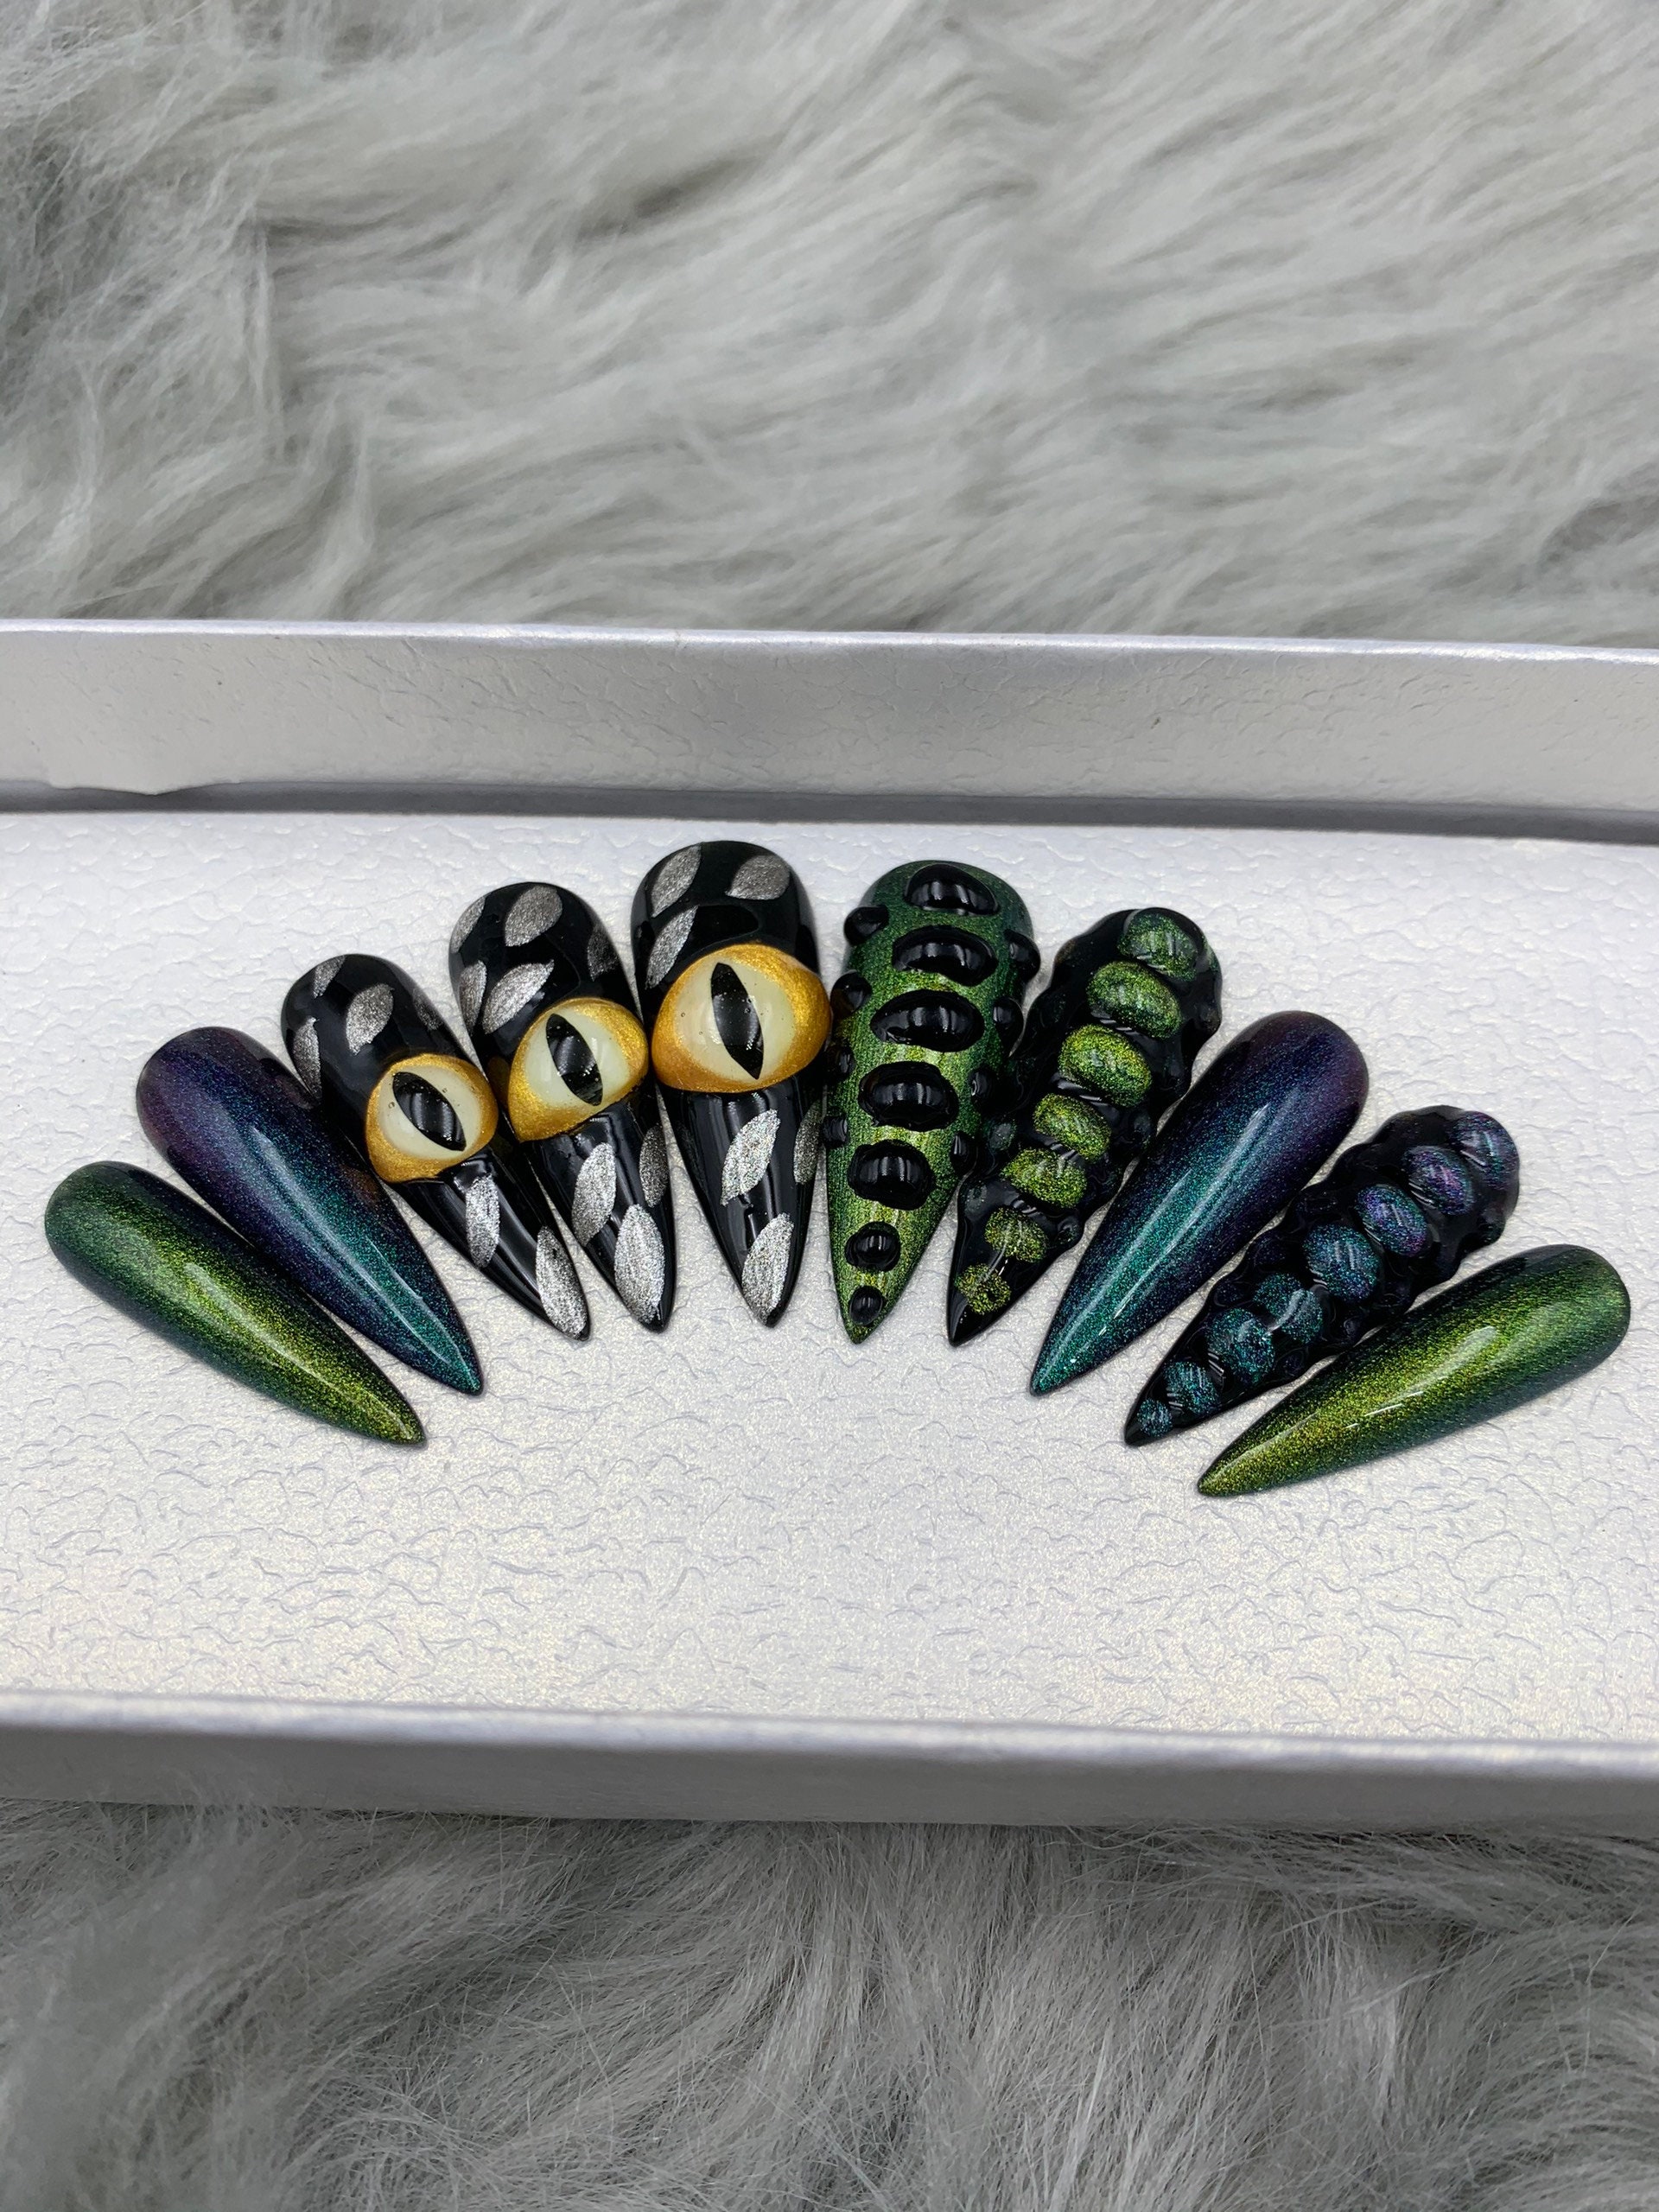 Black Nails With Chameleon Flakes Blue Green Shift Short Coffin Press on  Nails Full Set Any Shape Fall Nails Glitter 